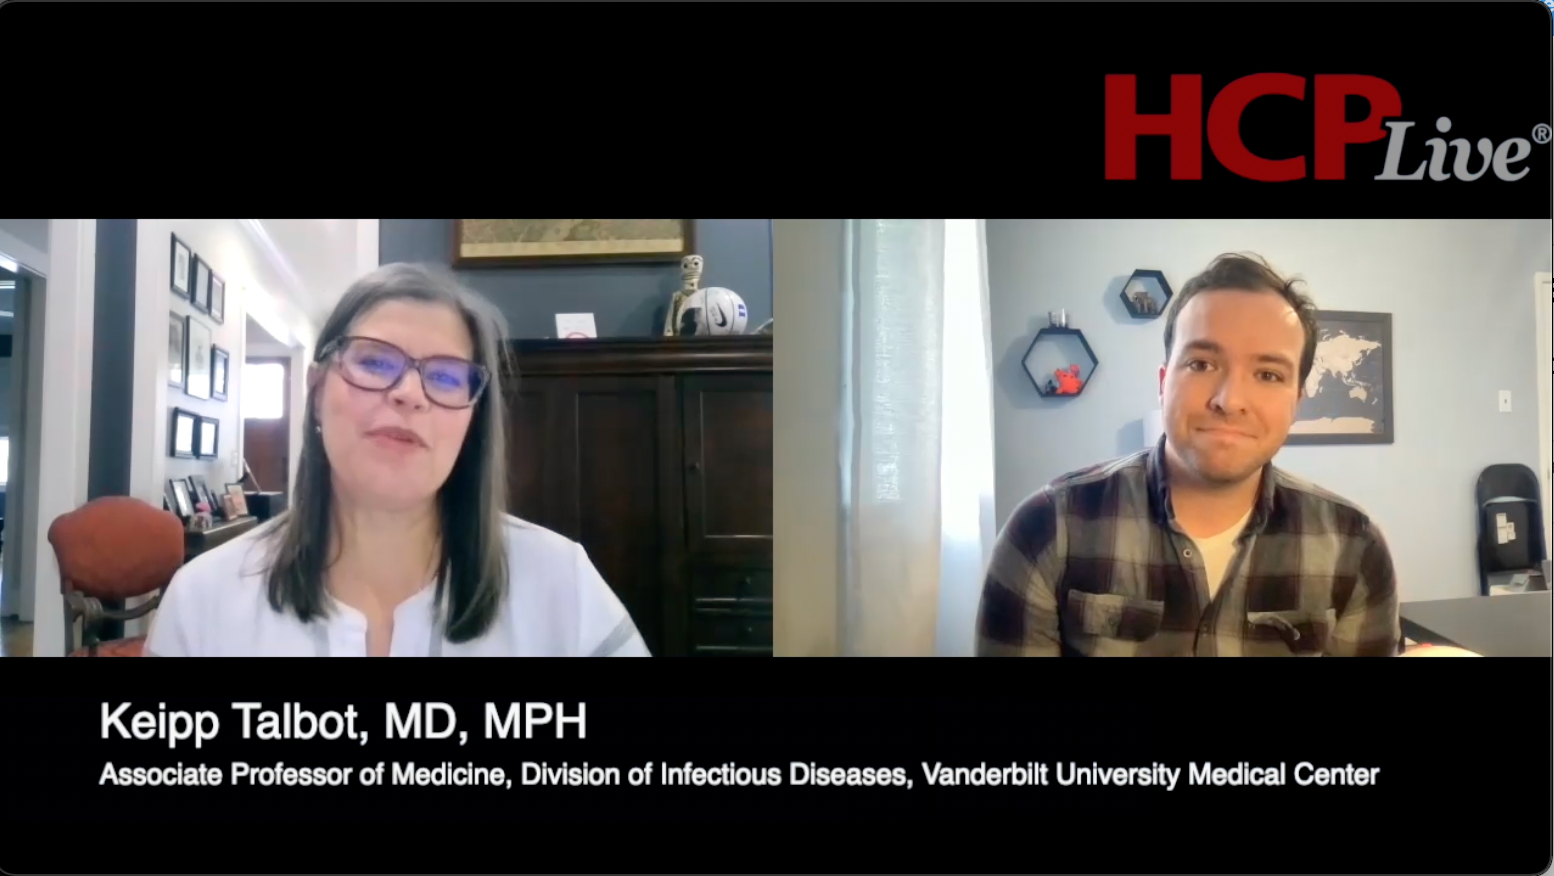 Keipp Talbot, MD, MPH: The State of Flu Vaccine Research